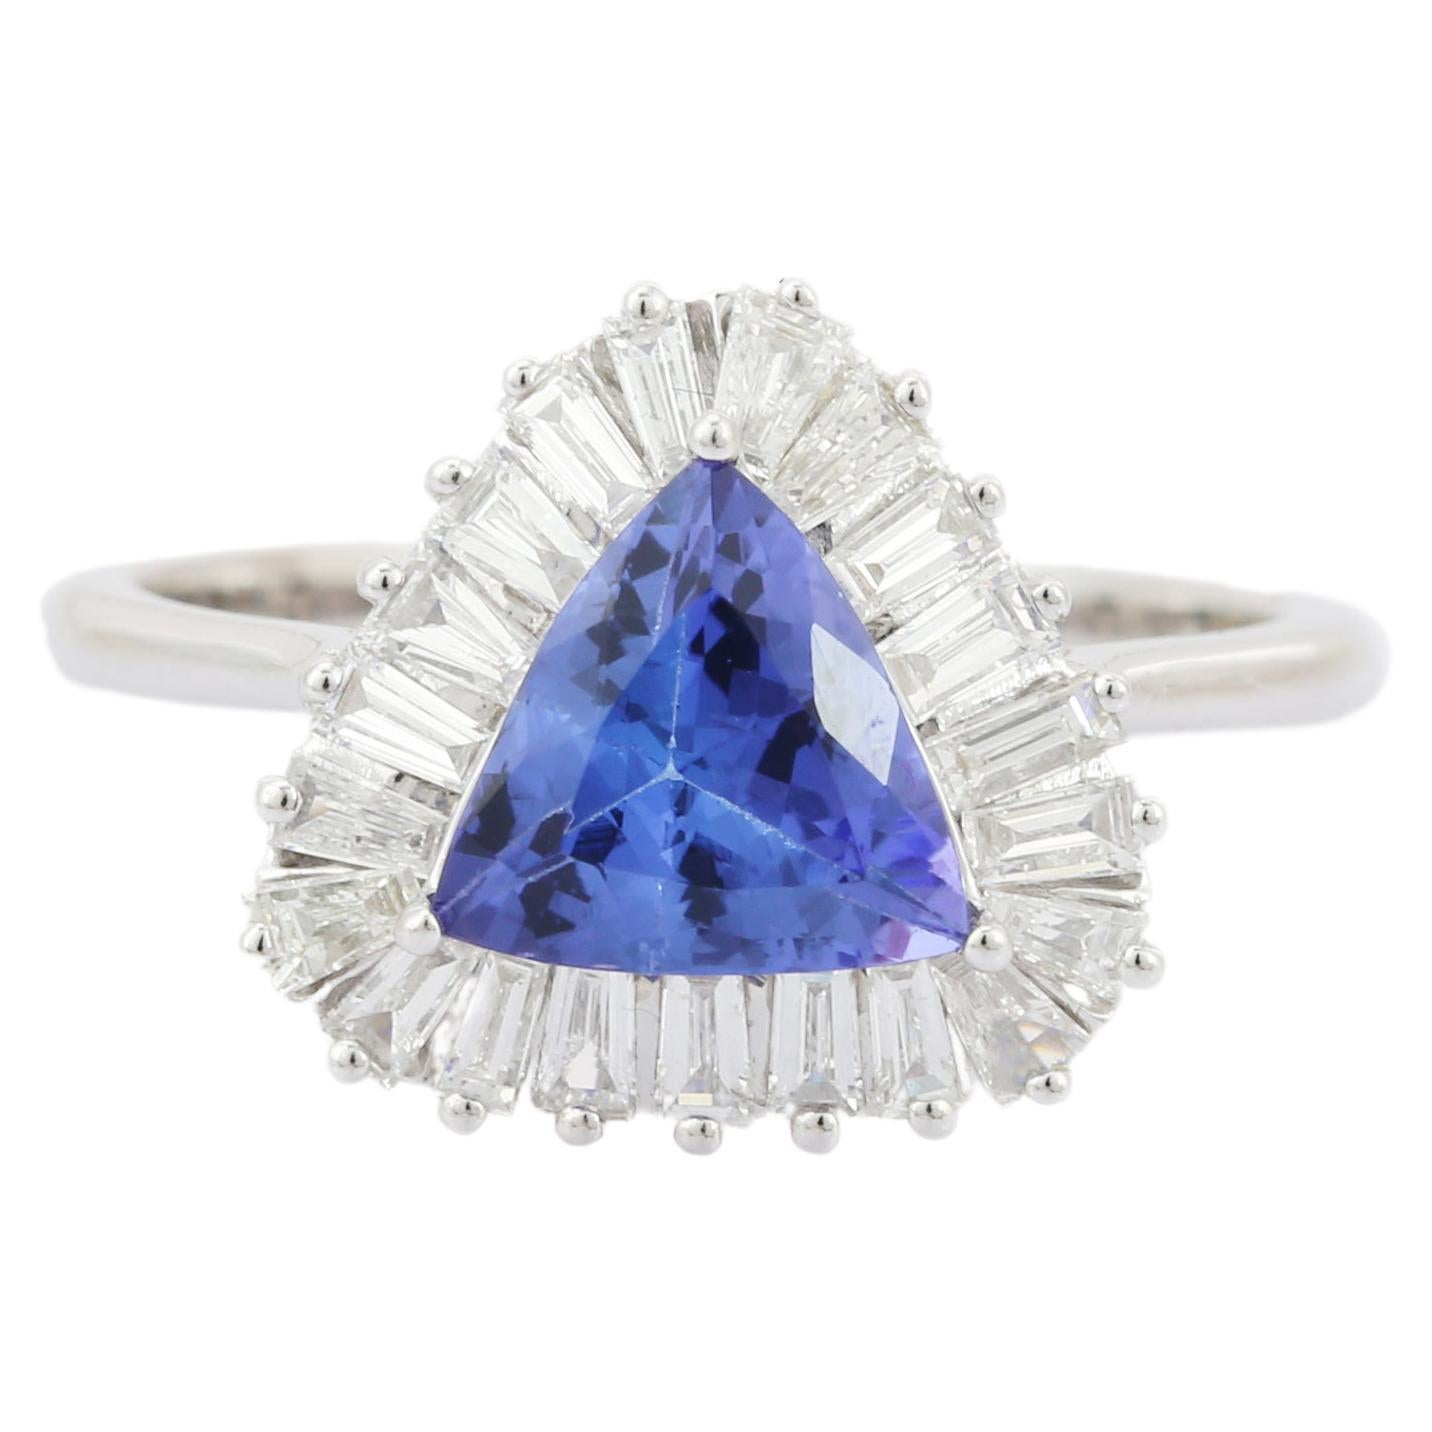 For Sale:  Tanzanite Diamond Gemstone Engagement Ring in 18K Solid White Gold